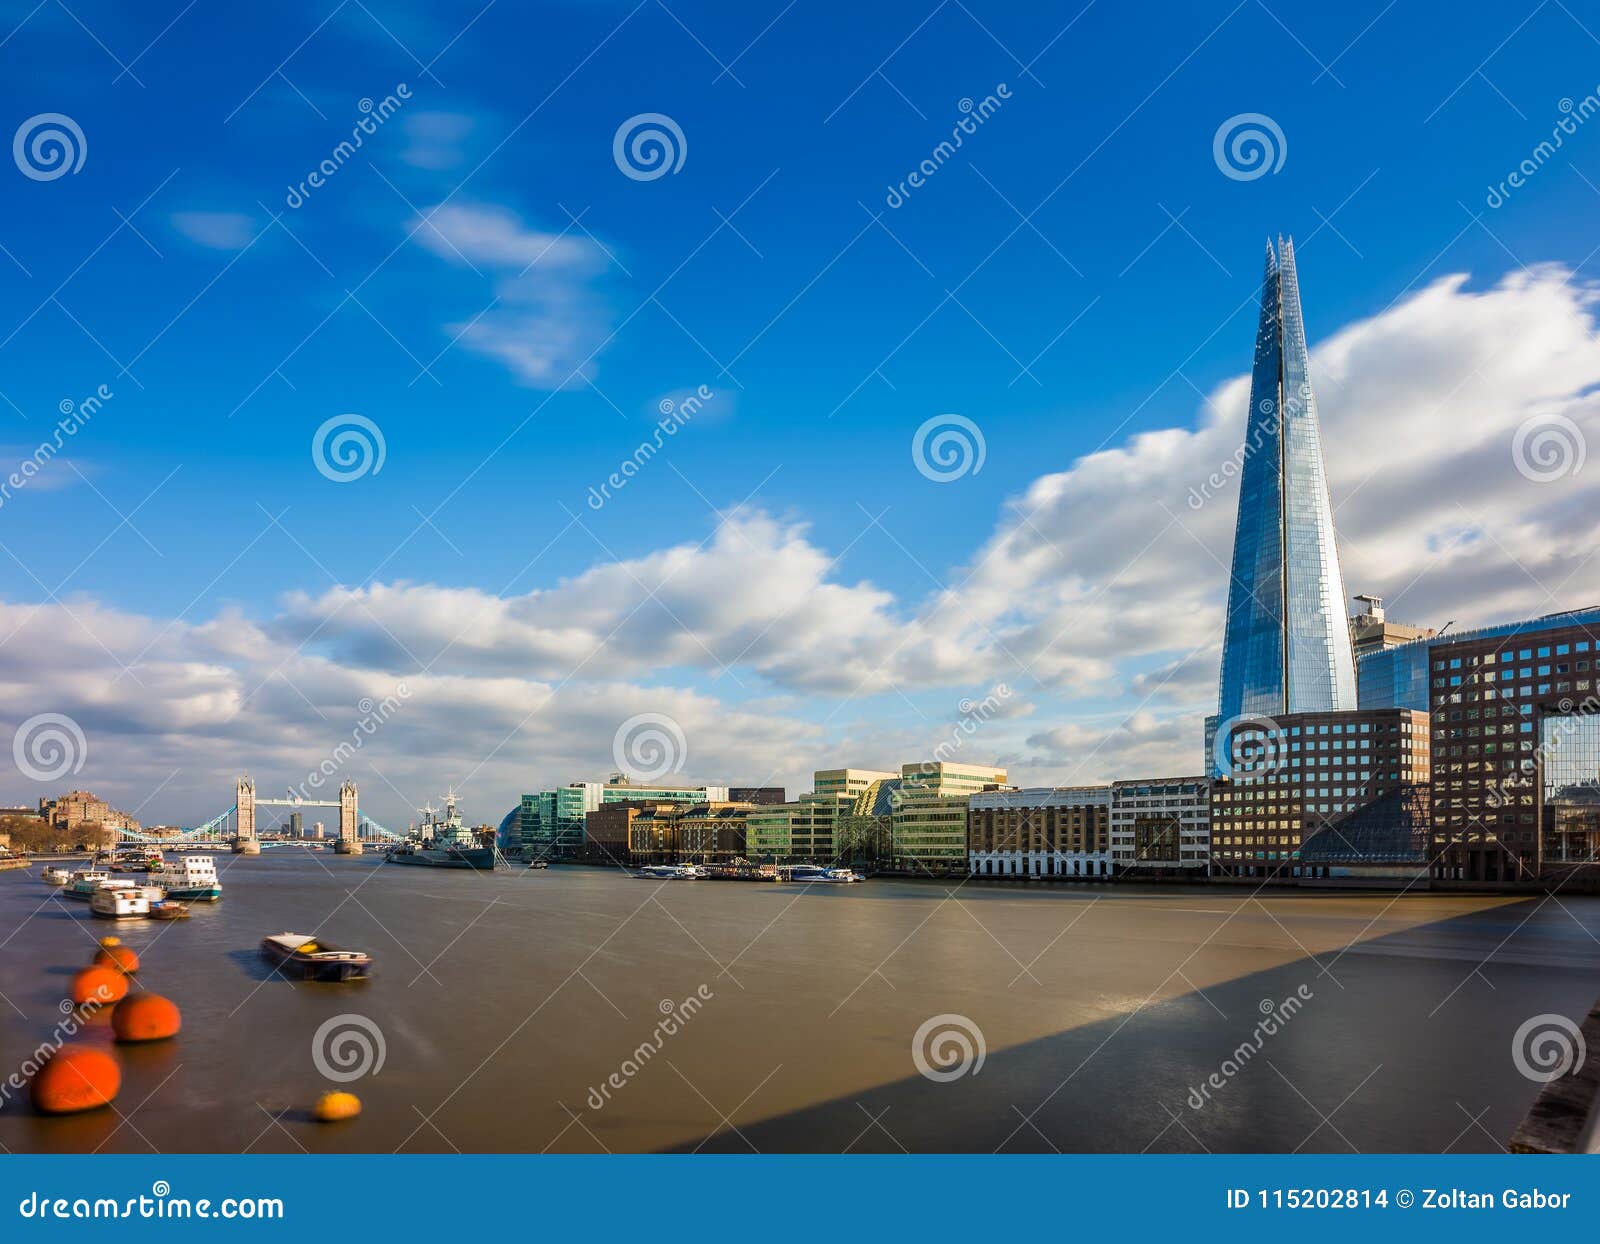 london, england - the shard, london`s highest skyscraper with the iconic tower bridge at background